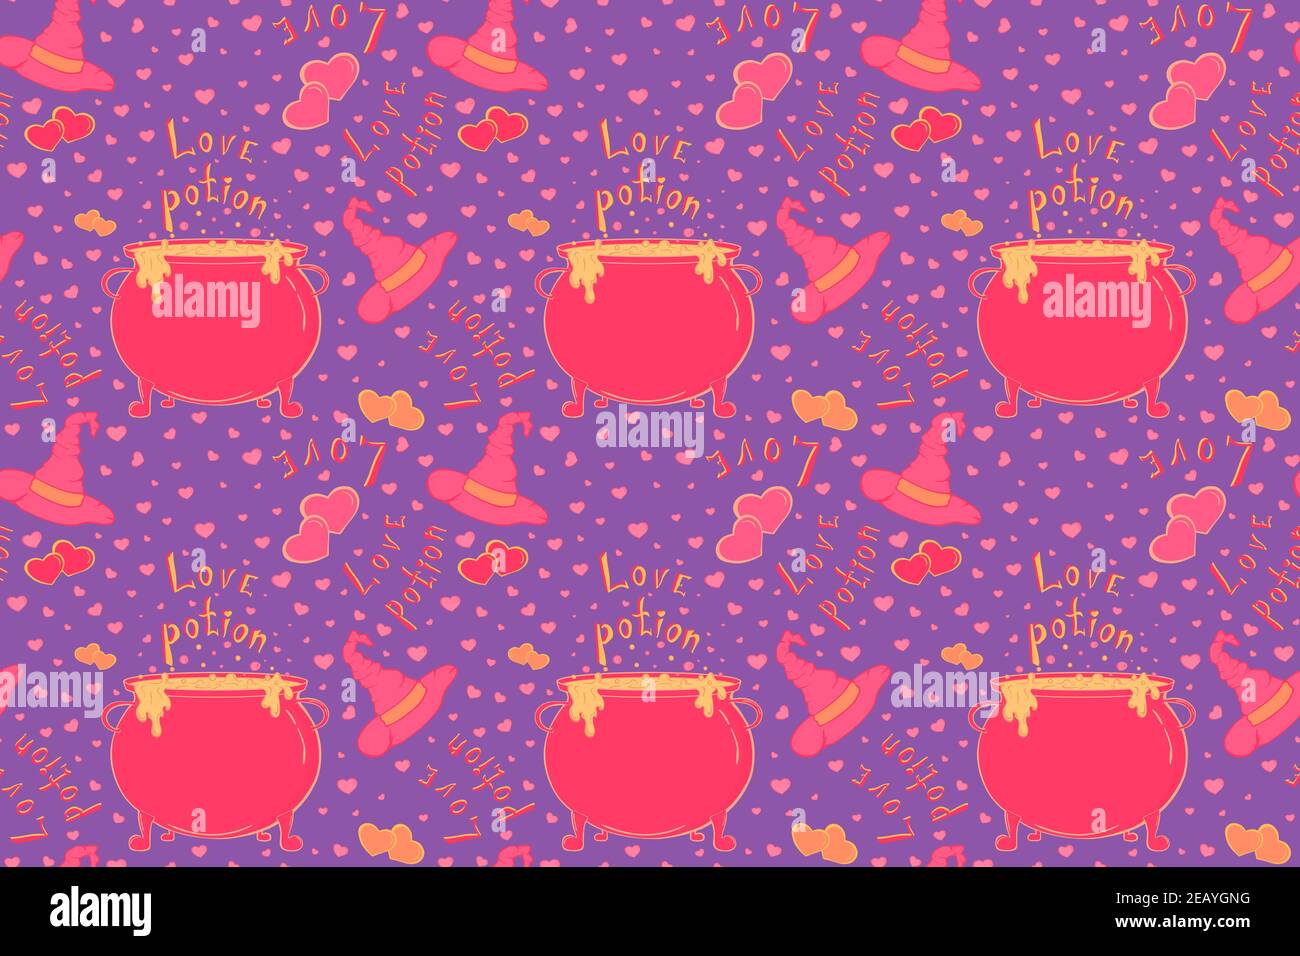 Nice love potion seamless pattern with cauldron Stock Vector